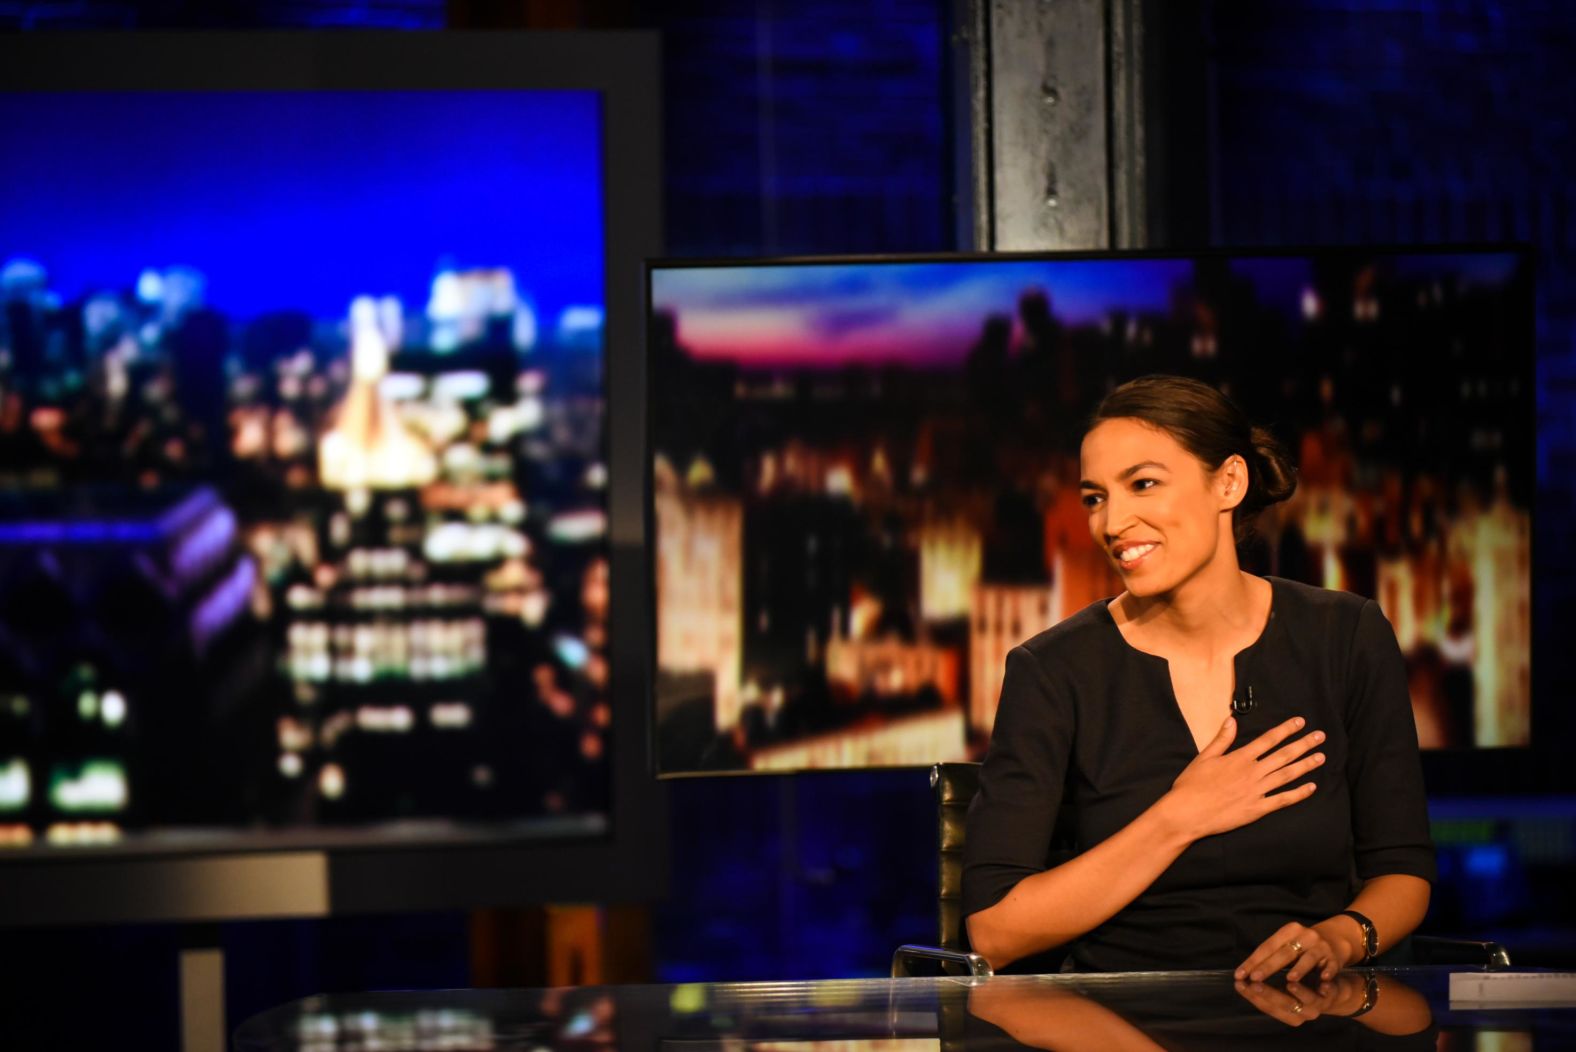 Ocasio-Cortez reacts to video during her interview with CNN's Erin Burnett on Wednesday. During the 2016 presidential season, Ocasio-Cortez worked as an organizer for US Sen. Bernie Sanders.